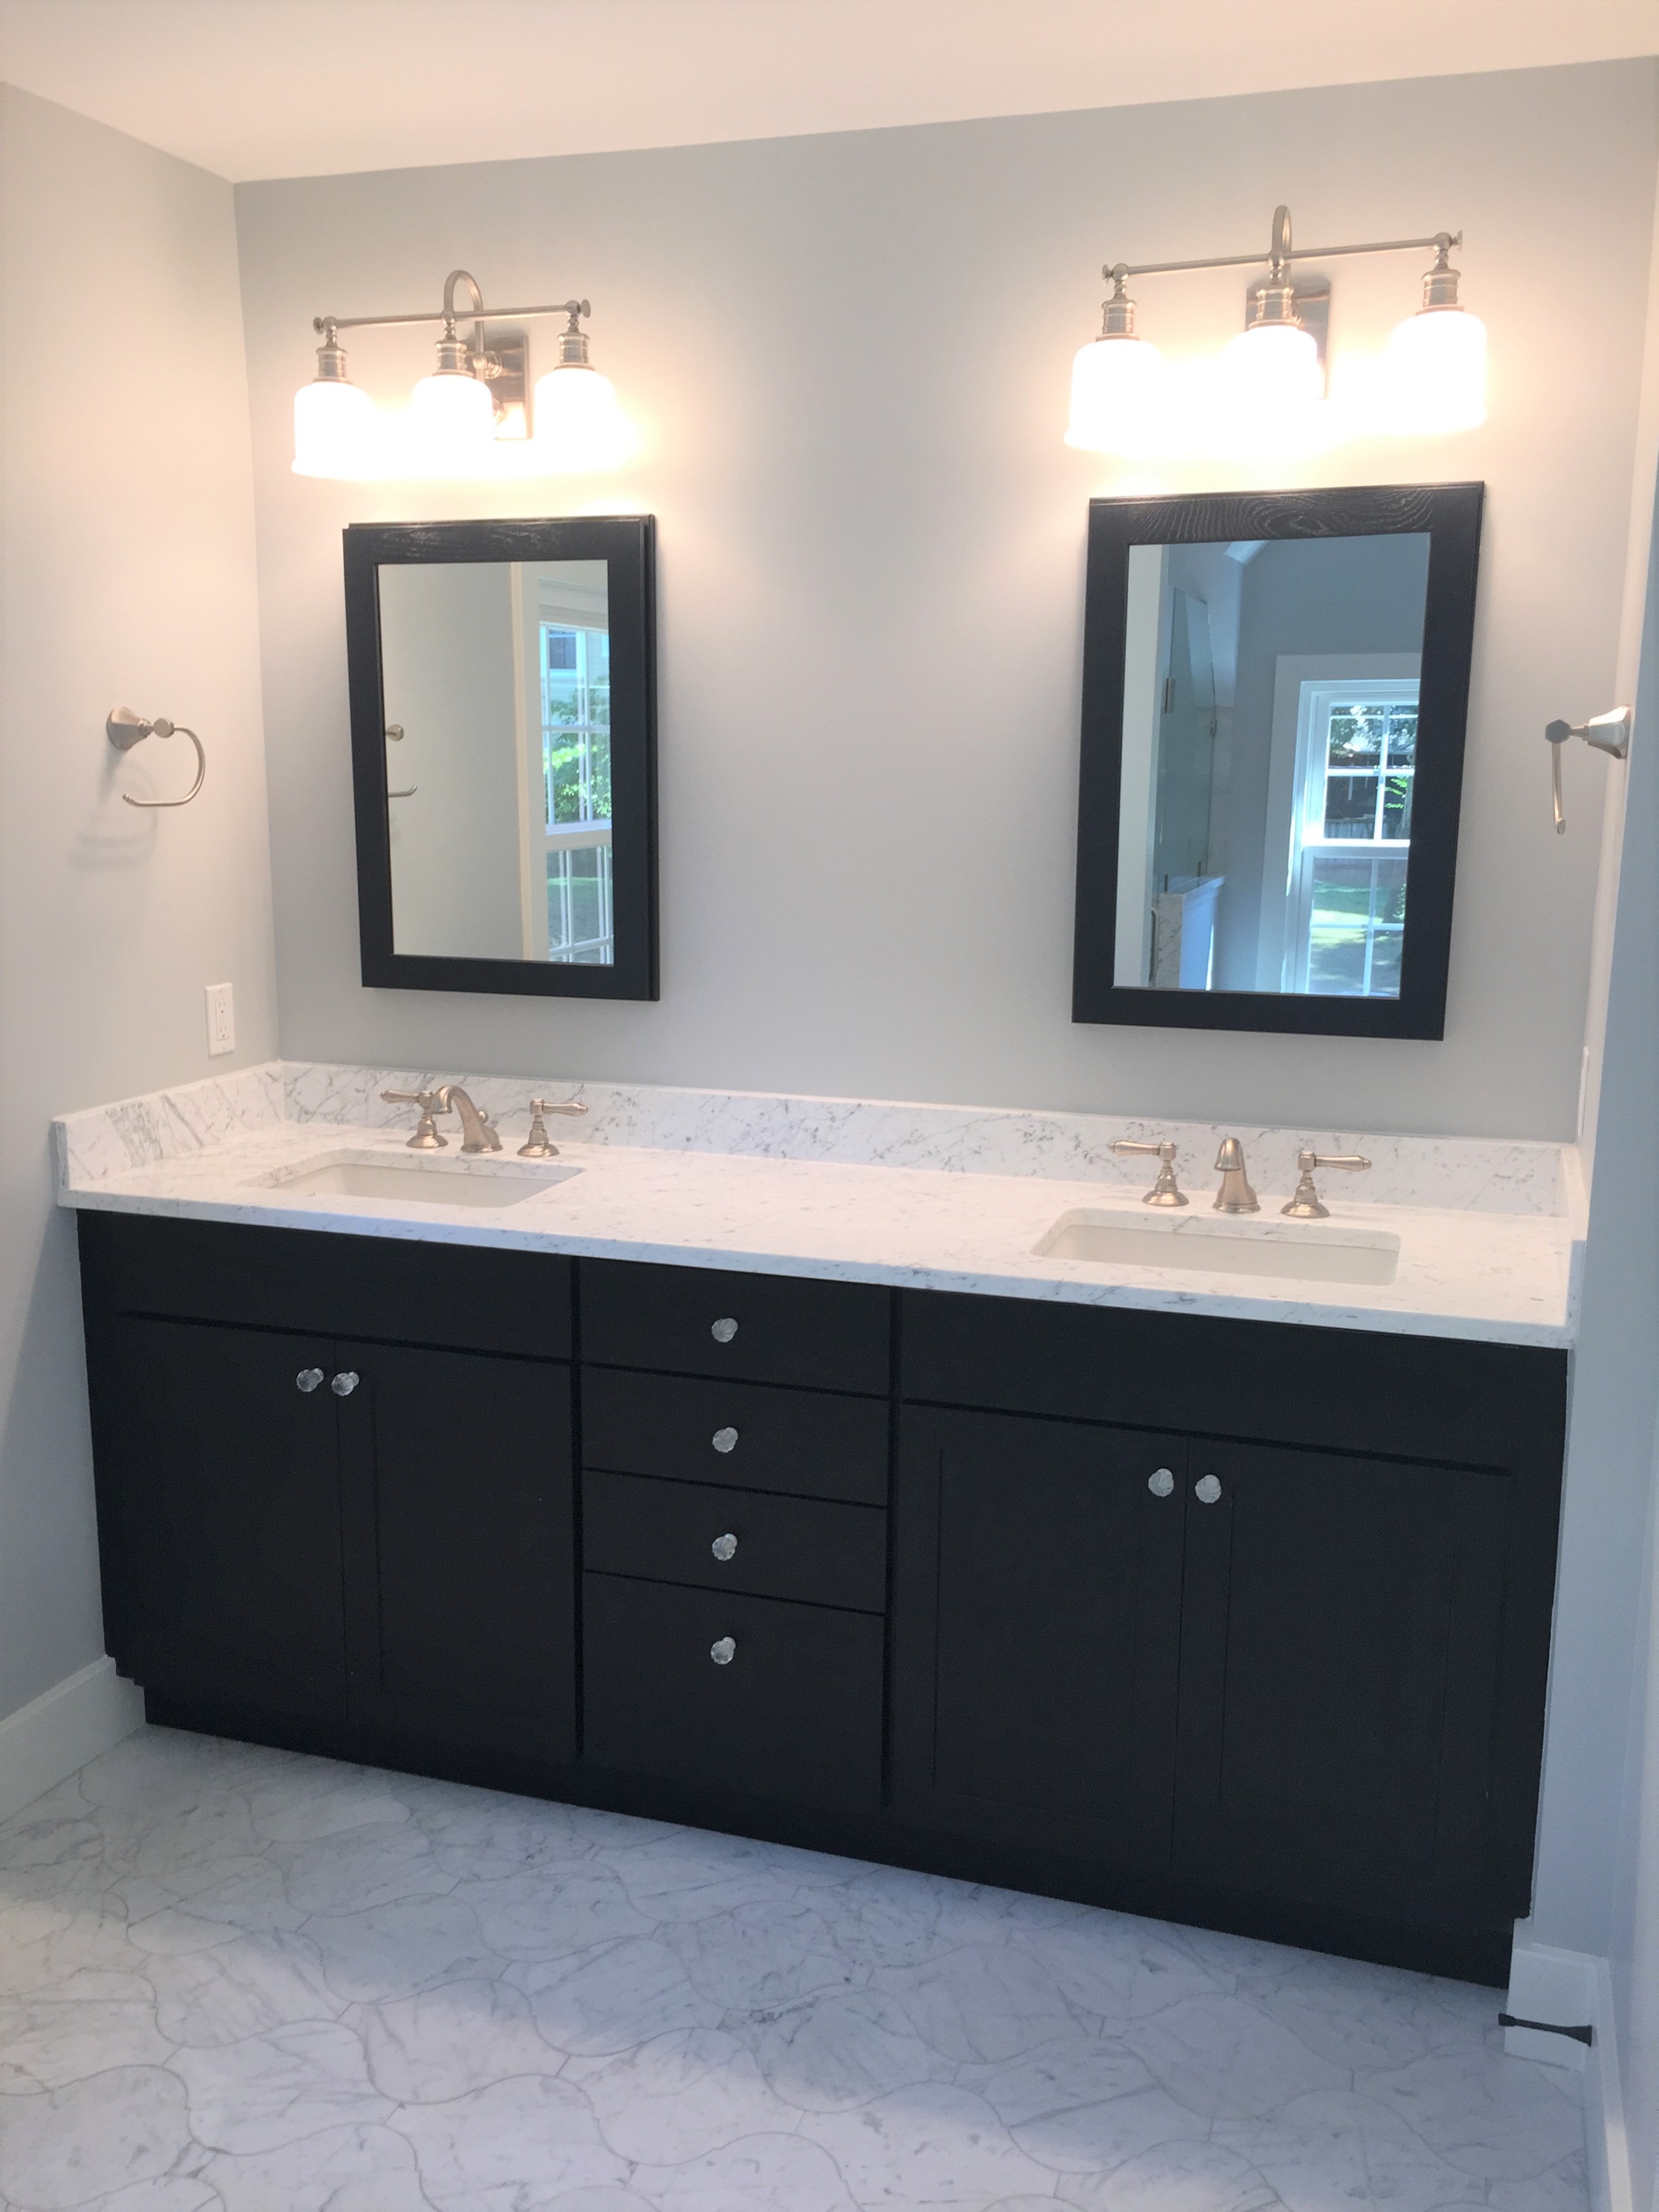 Remodeled bathroom counter tops and lighting